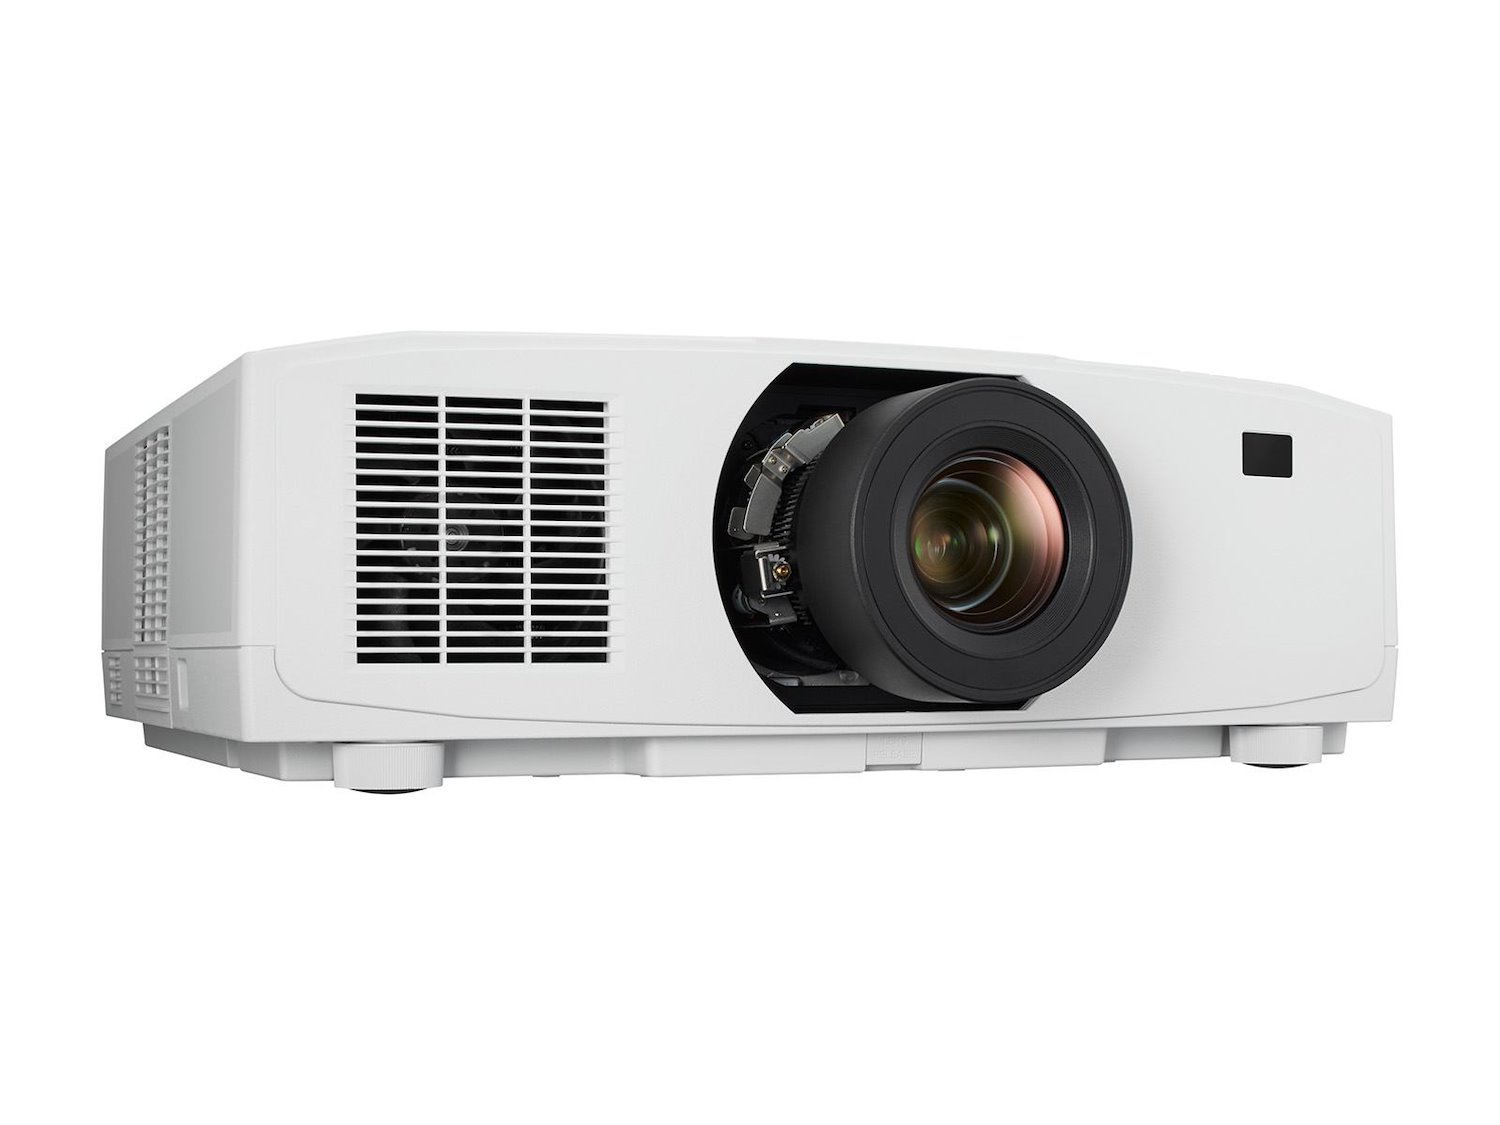 Nec Pv800ul Data Projector Standard Throw Projector 8000 Ansi Lumens 3LCD Wuxga [1920X1200] White (Pv800ulwh Projector - Lens Not Included - 8000 Ansi Lumens Wuxga 3LCD Technology Installation Project